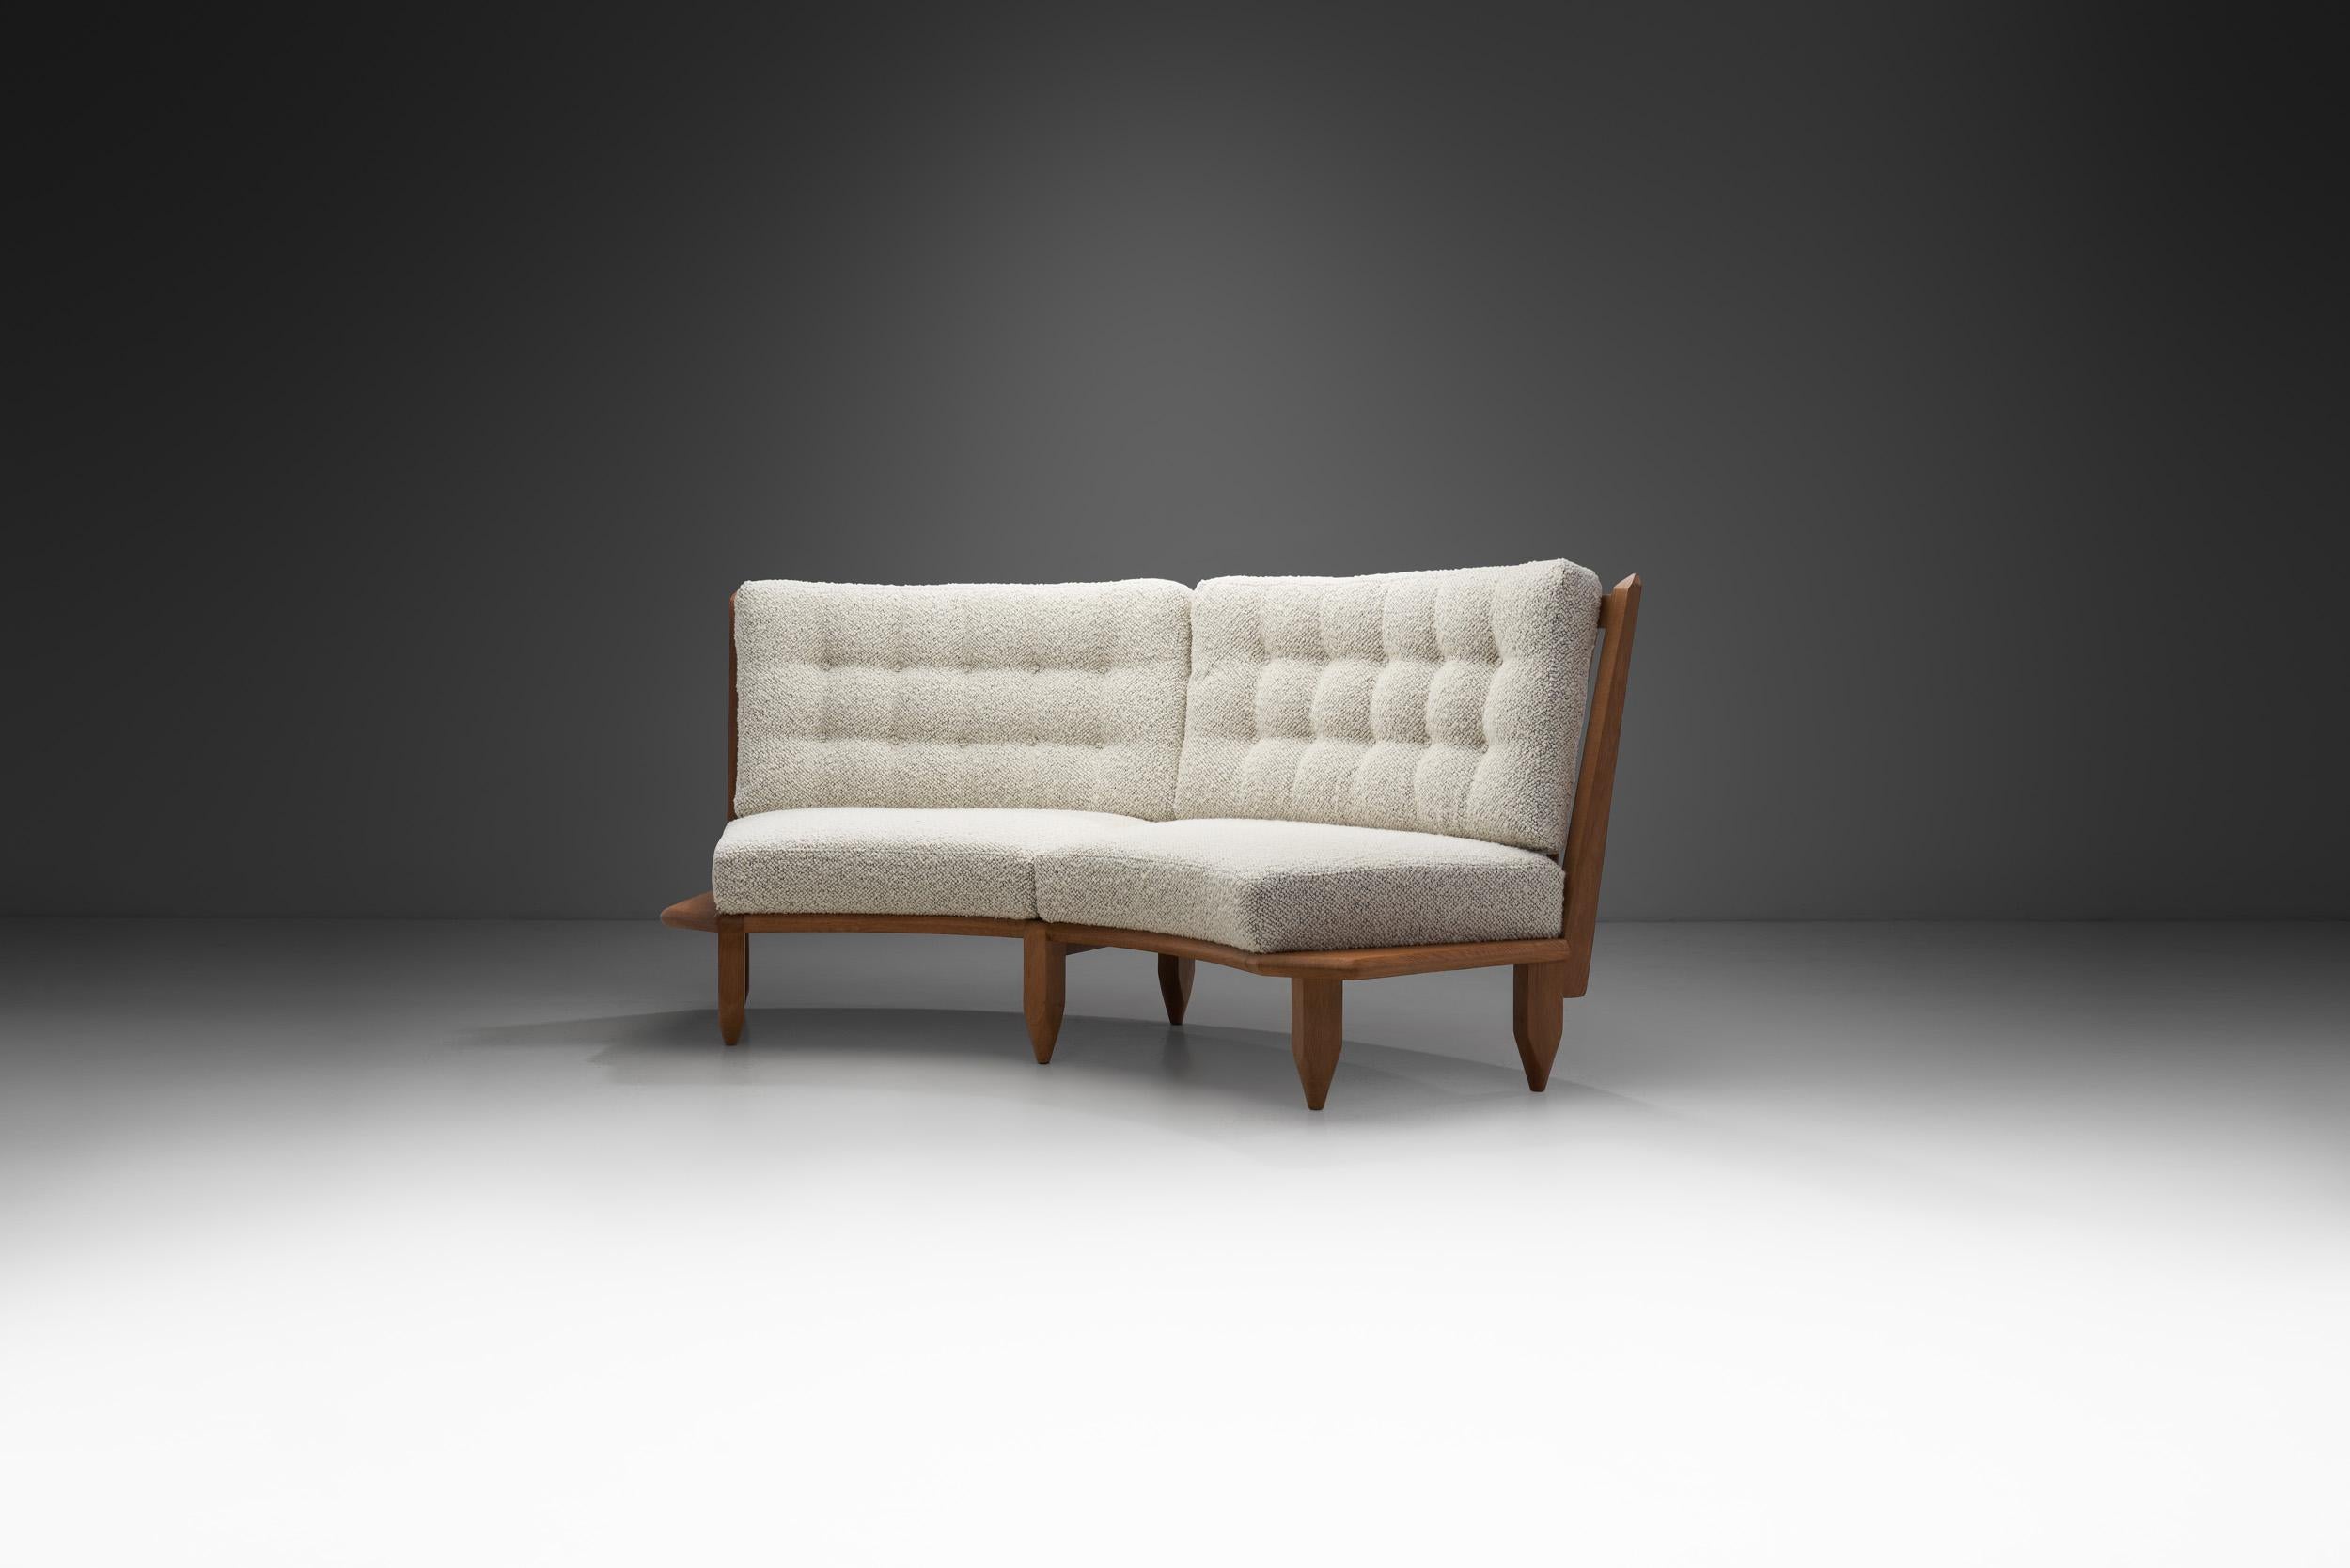 The best design characteristics of Guillerme and Chambron meet in this beautiful, artistic oaken sofa. The duo’s designs are exceptional for a wide array of reasons, starting from the solid oak as the main material to the masterfully crafted details